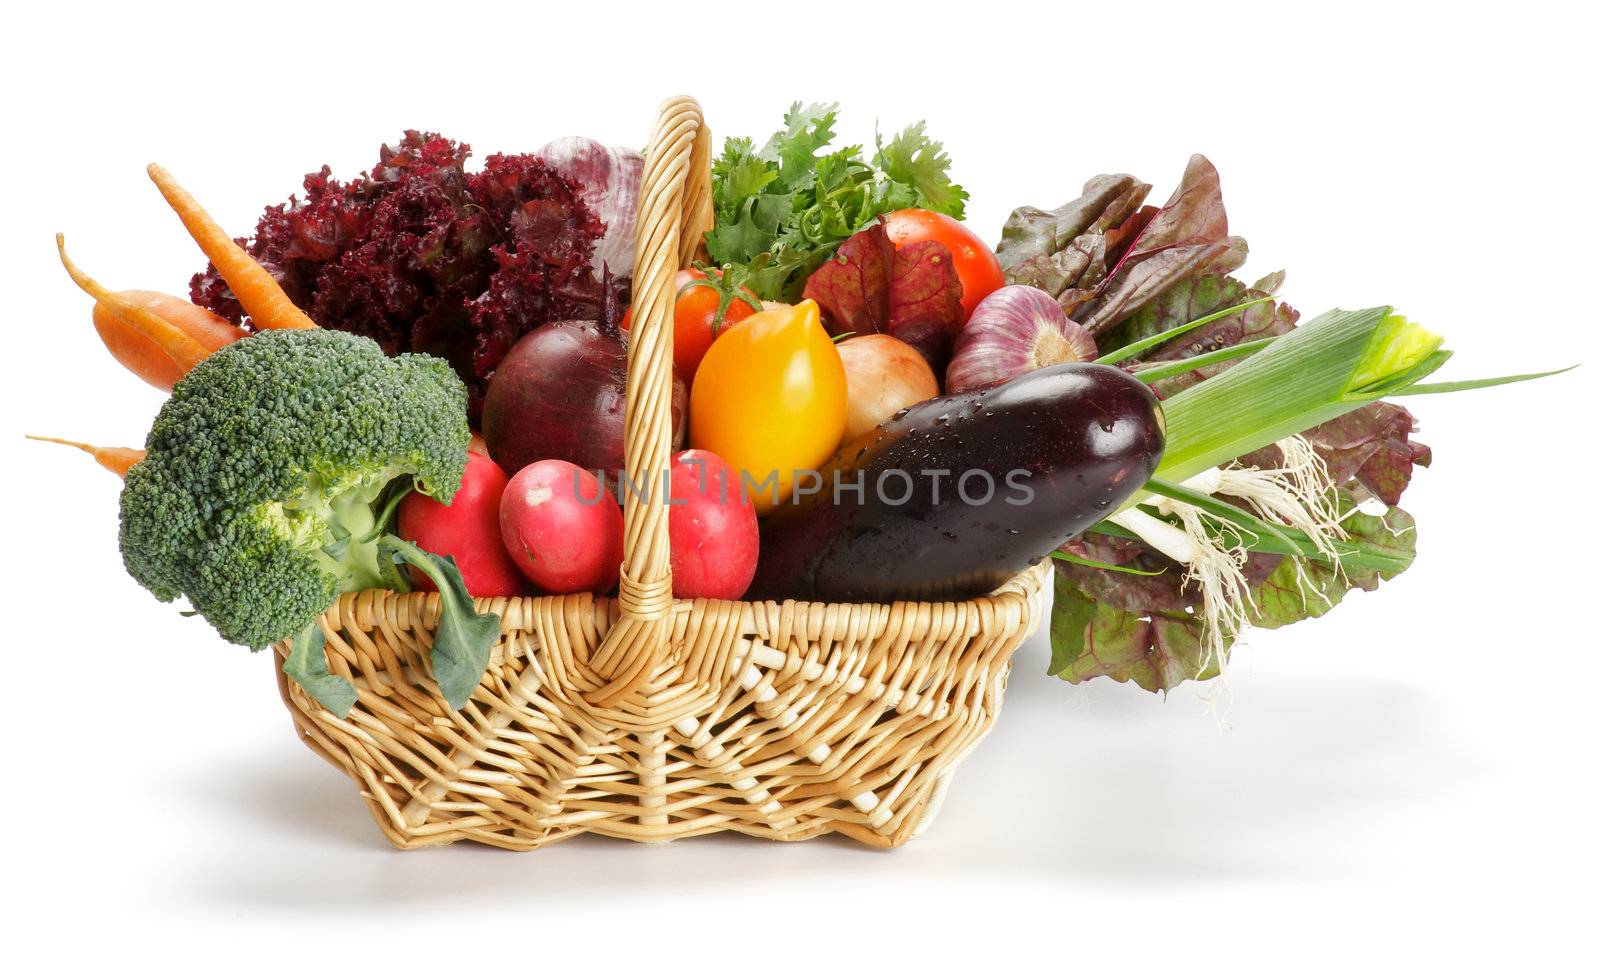 Basket of Various Vegetables with Broccoli, radishes, lettuce, onions, leeks, beets, carrots, red tomatoes, yellow tomatoes, parsley isolated on white background